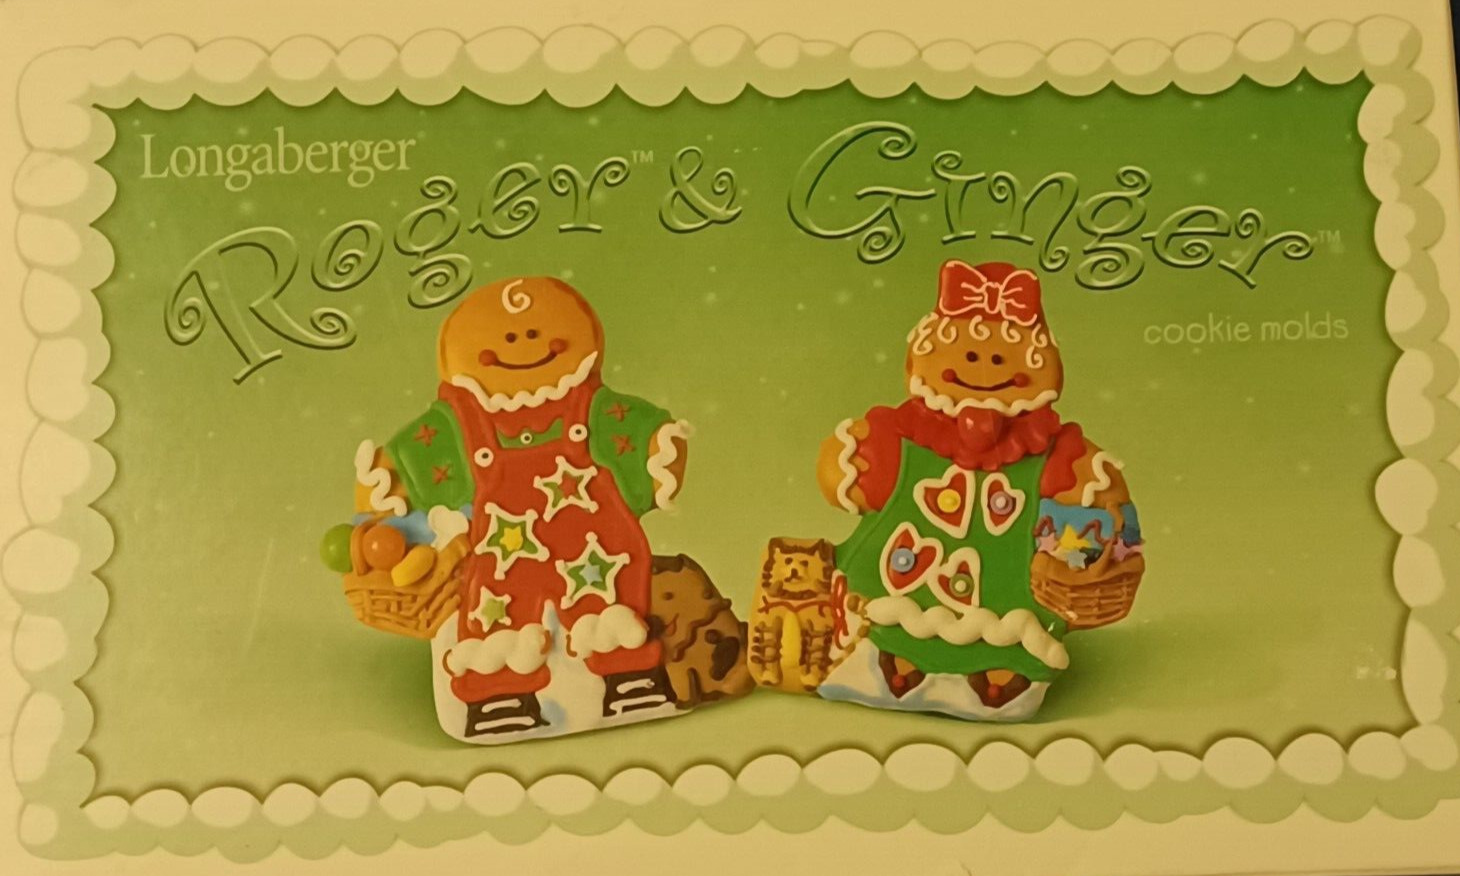 Longaberger 2000 Pottery Roger & Ginger Cookie Molds Made in USA New